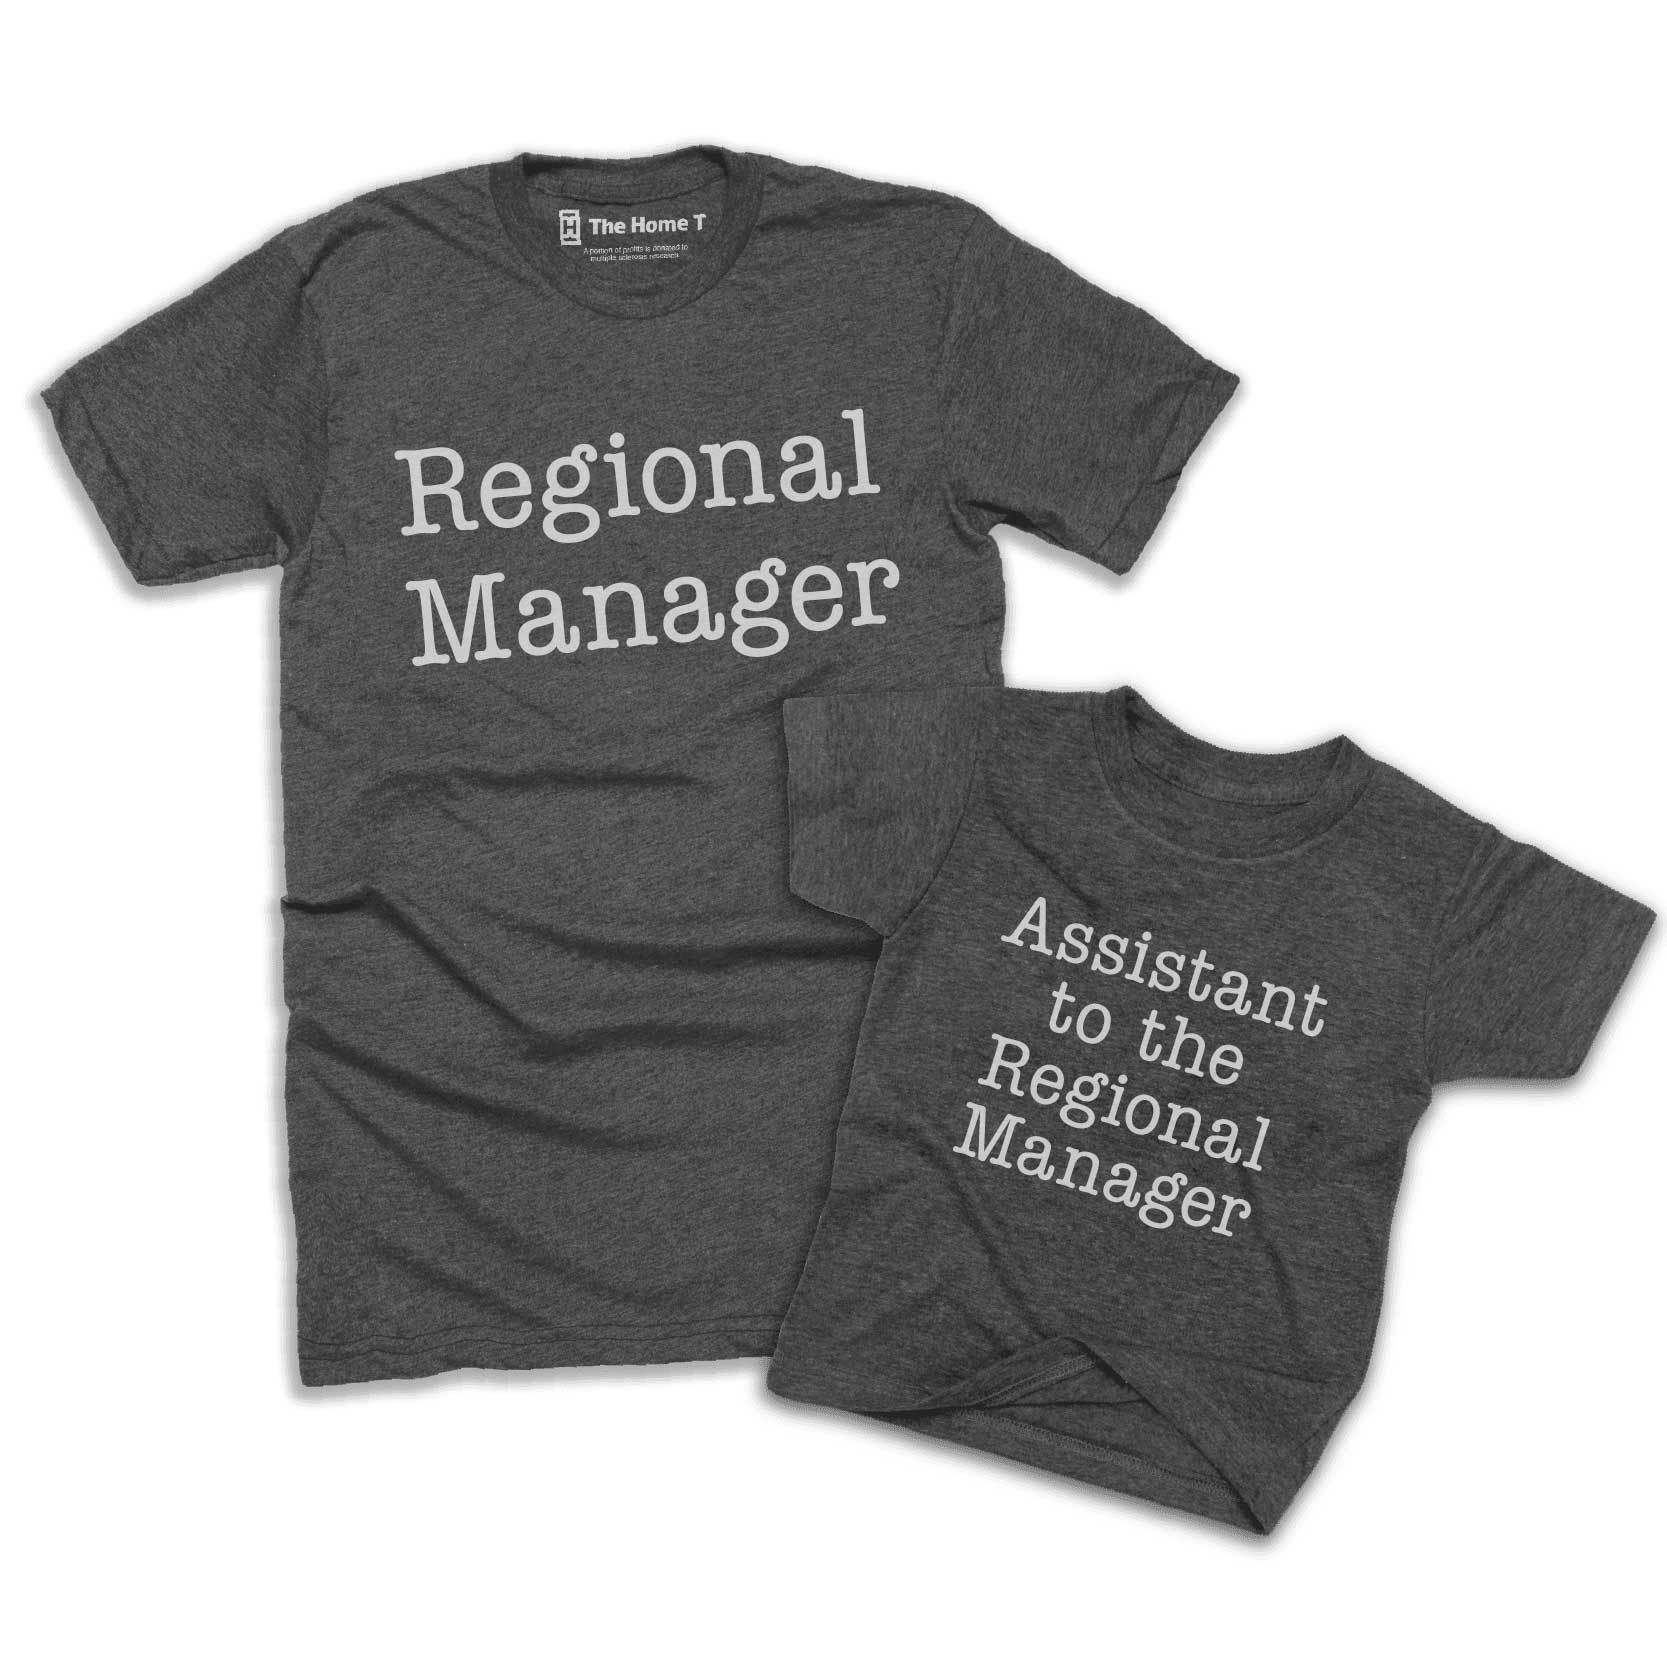 Regional Manager & Assistant to the Regional (Matching Set)